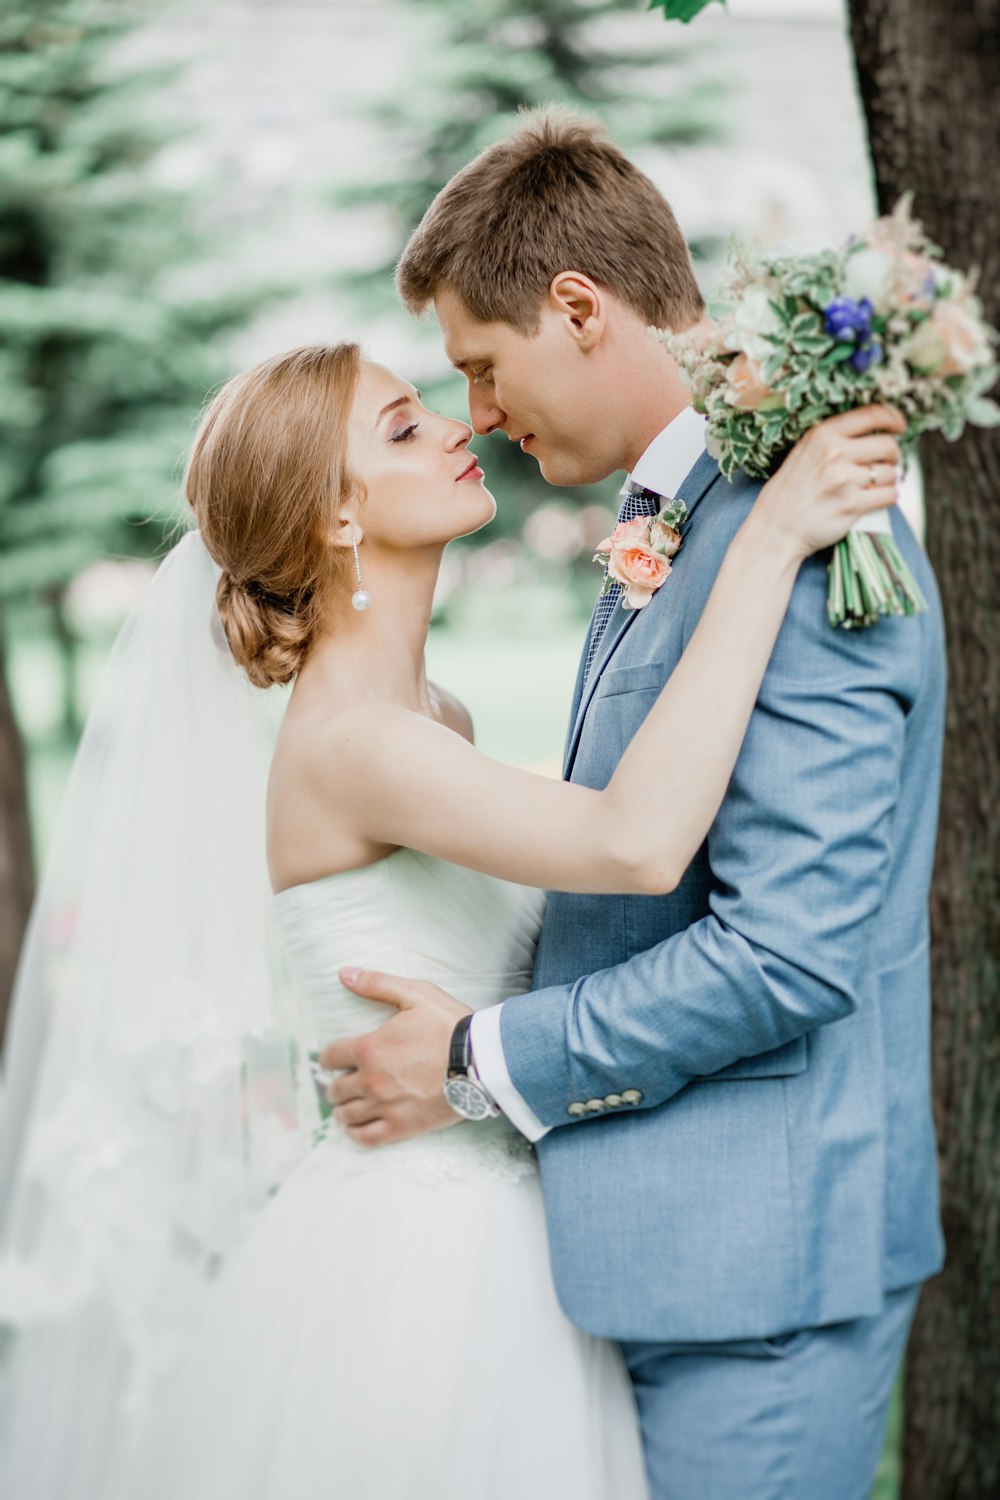 Wedding Kiss Pictures | Download Free Images on Unsplash